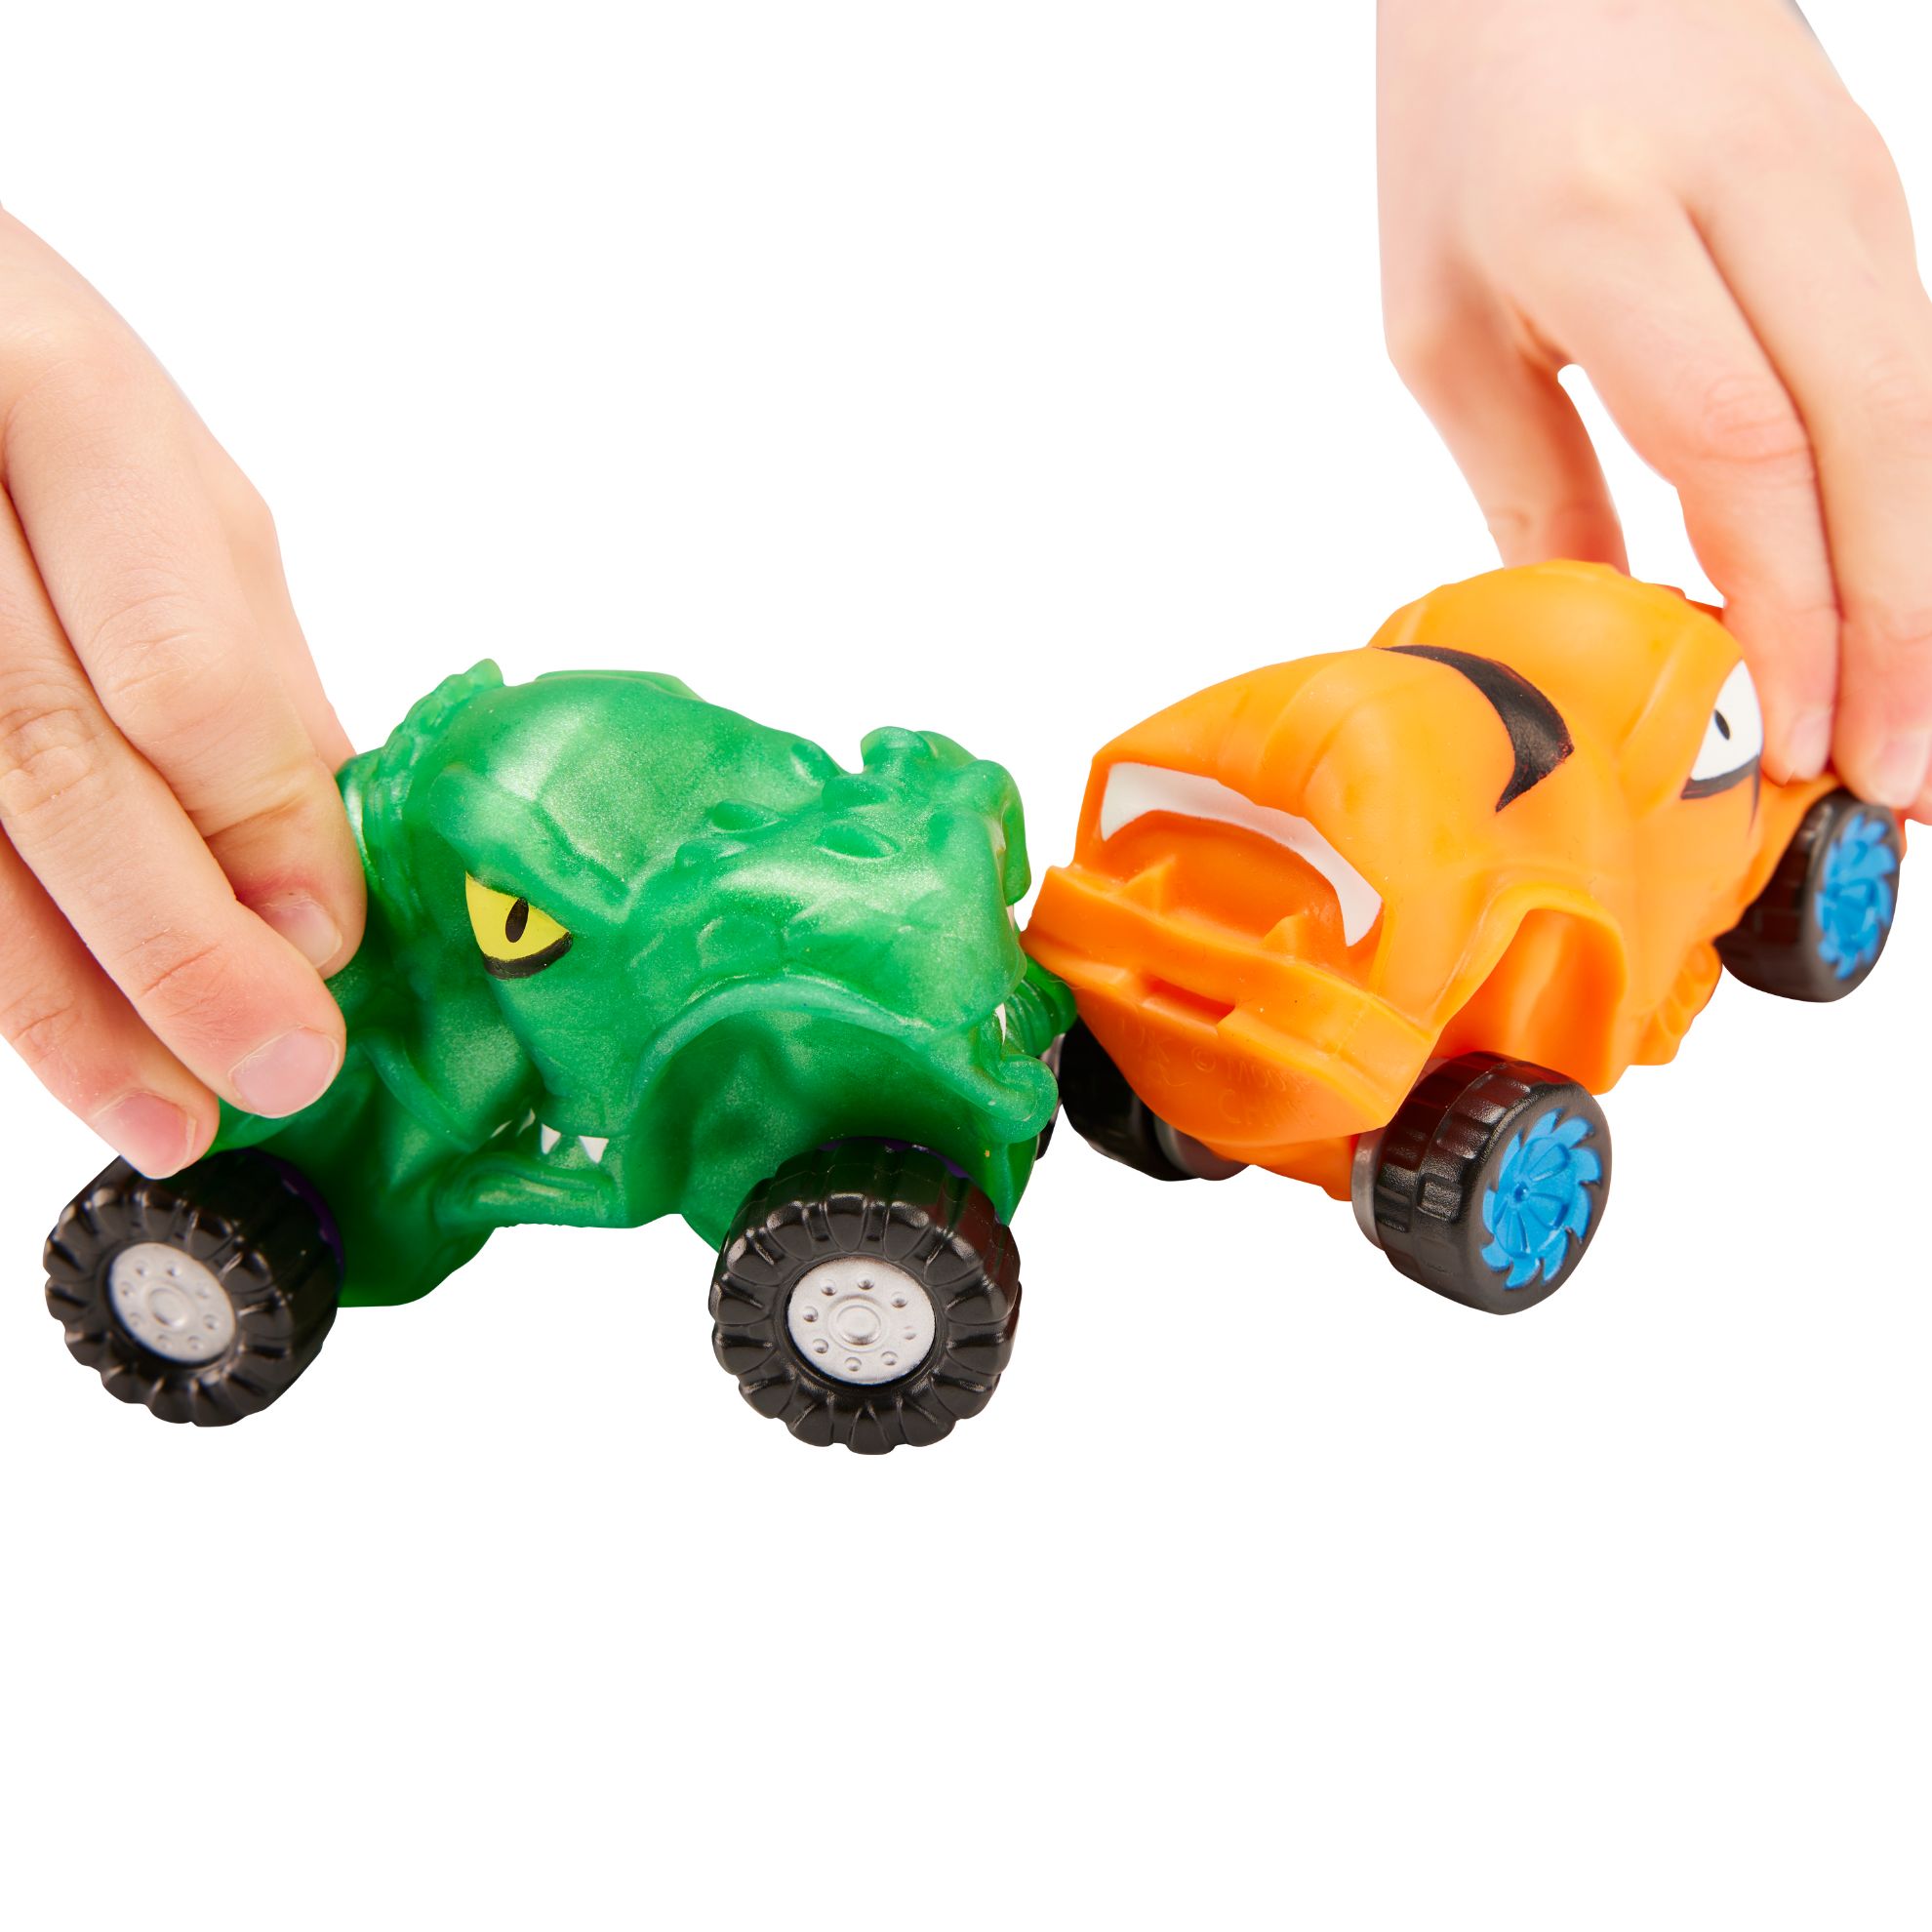 Individual car GOO JIT ZU-there are 4 different models sold separately.